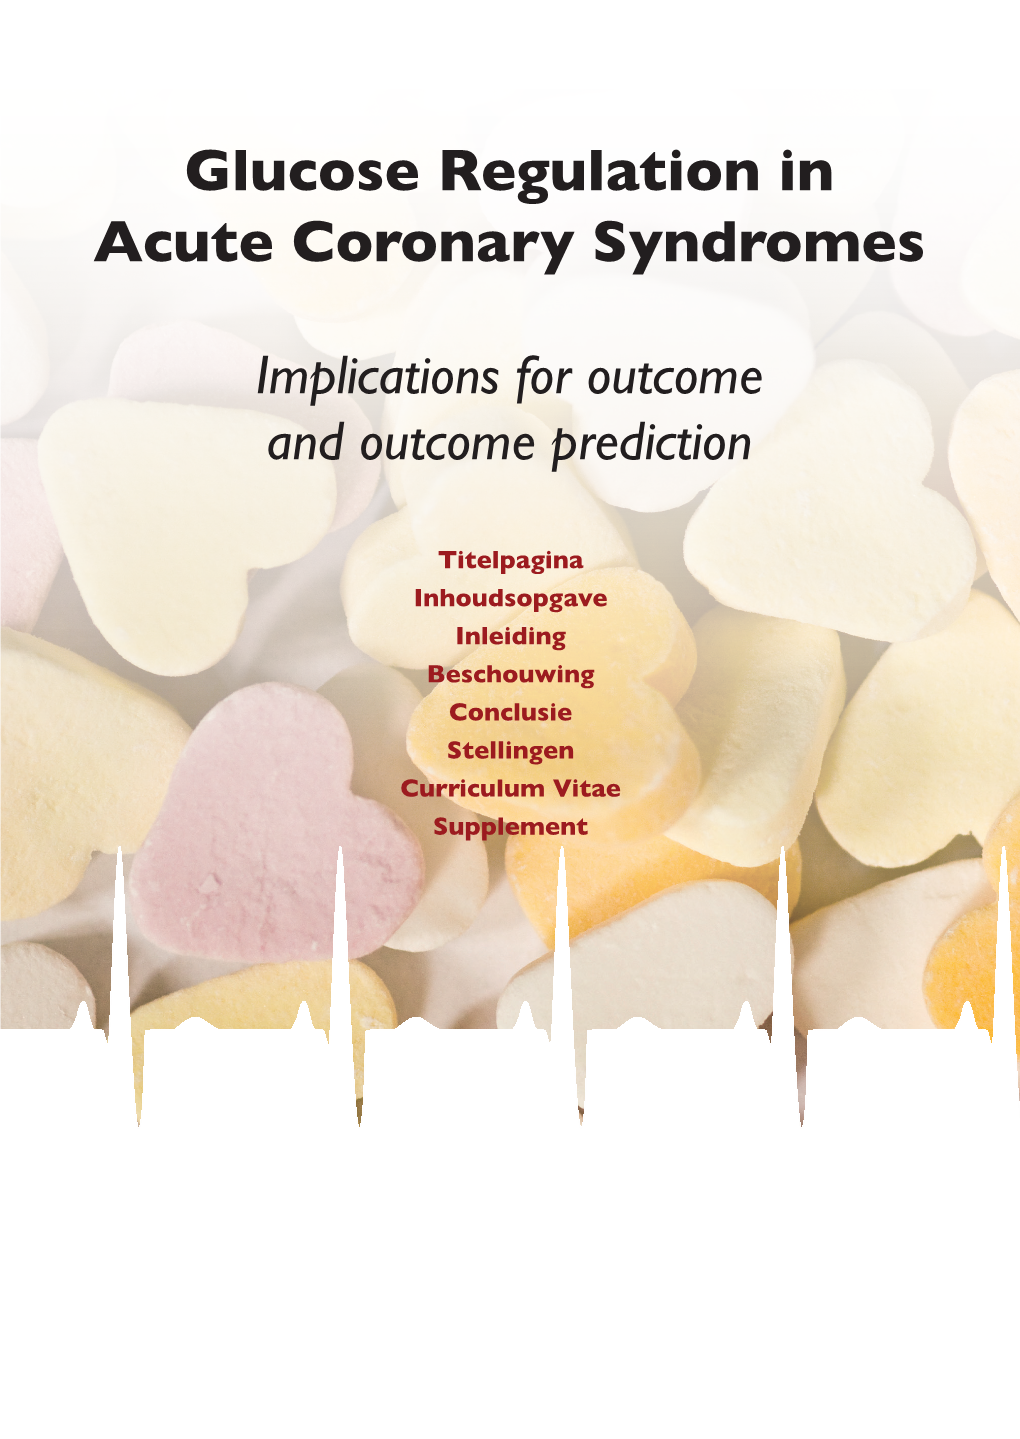 Glucose Regulation in Acute Coronary Syndromes